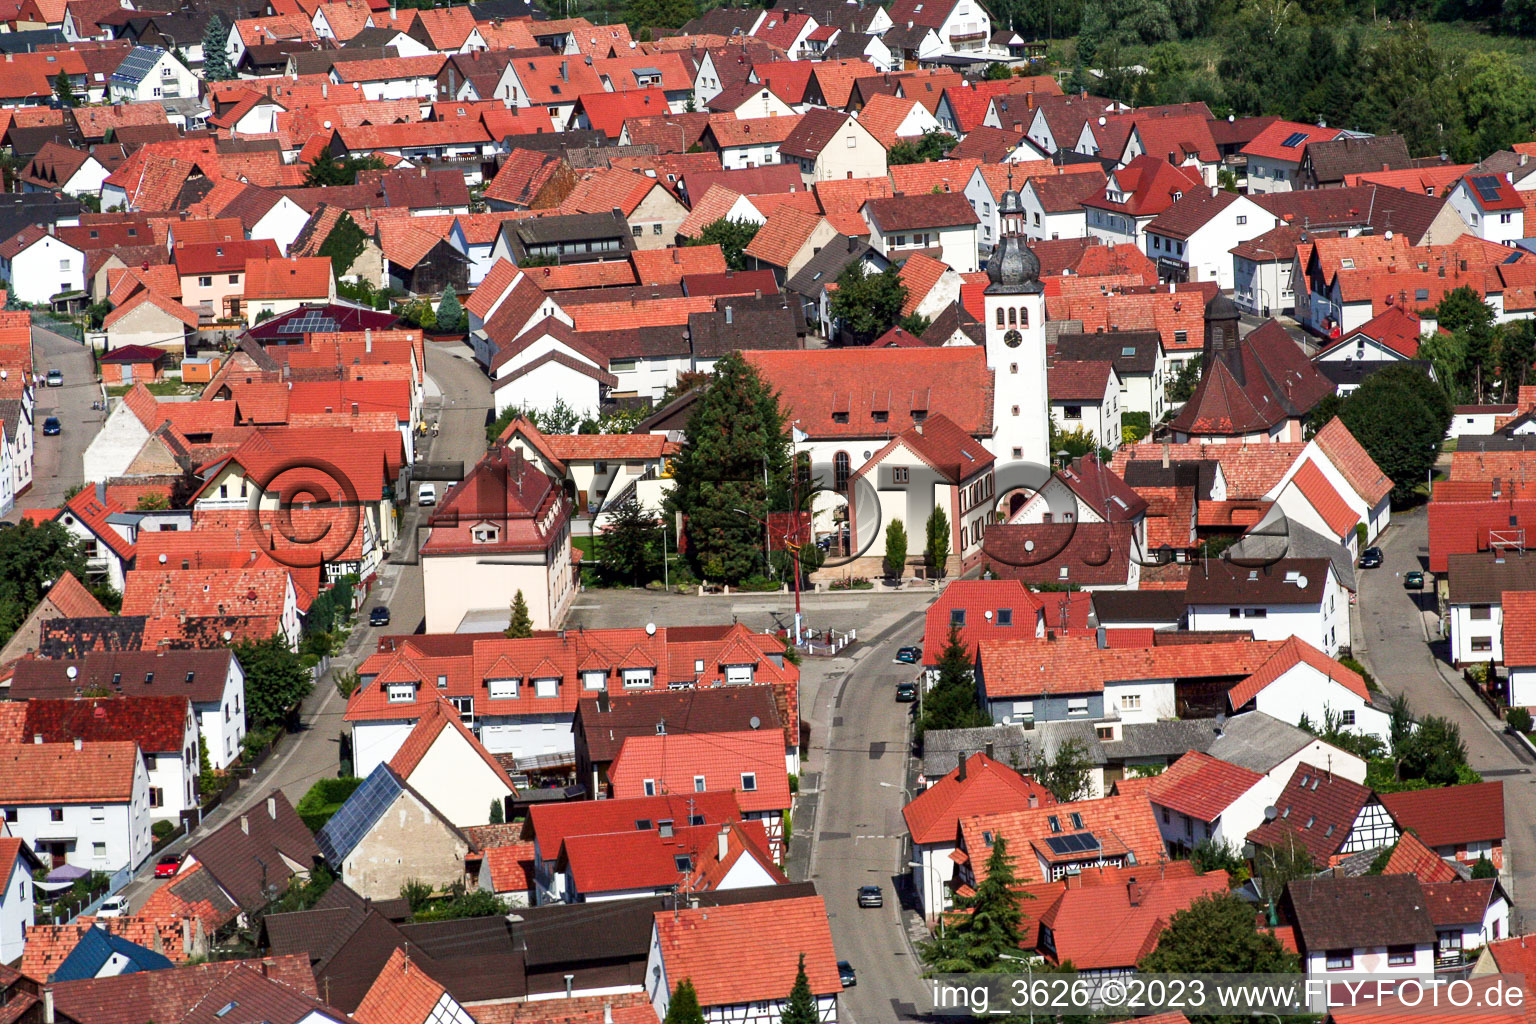 Neuburg in the state Rhineland-Palatinate, Germany seen from a drone